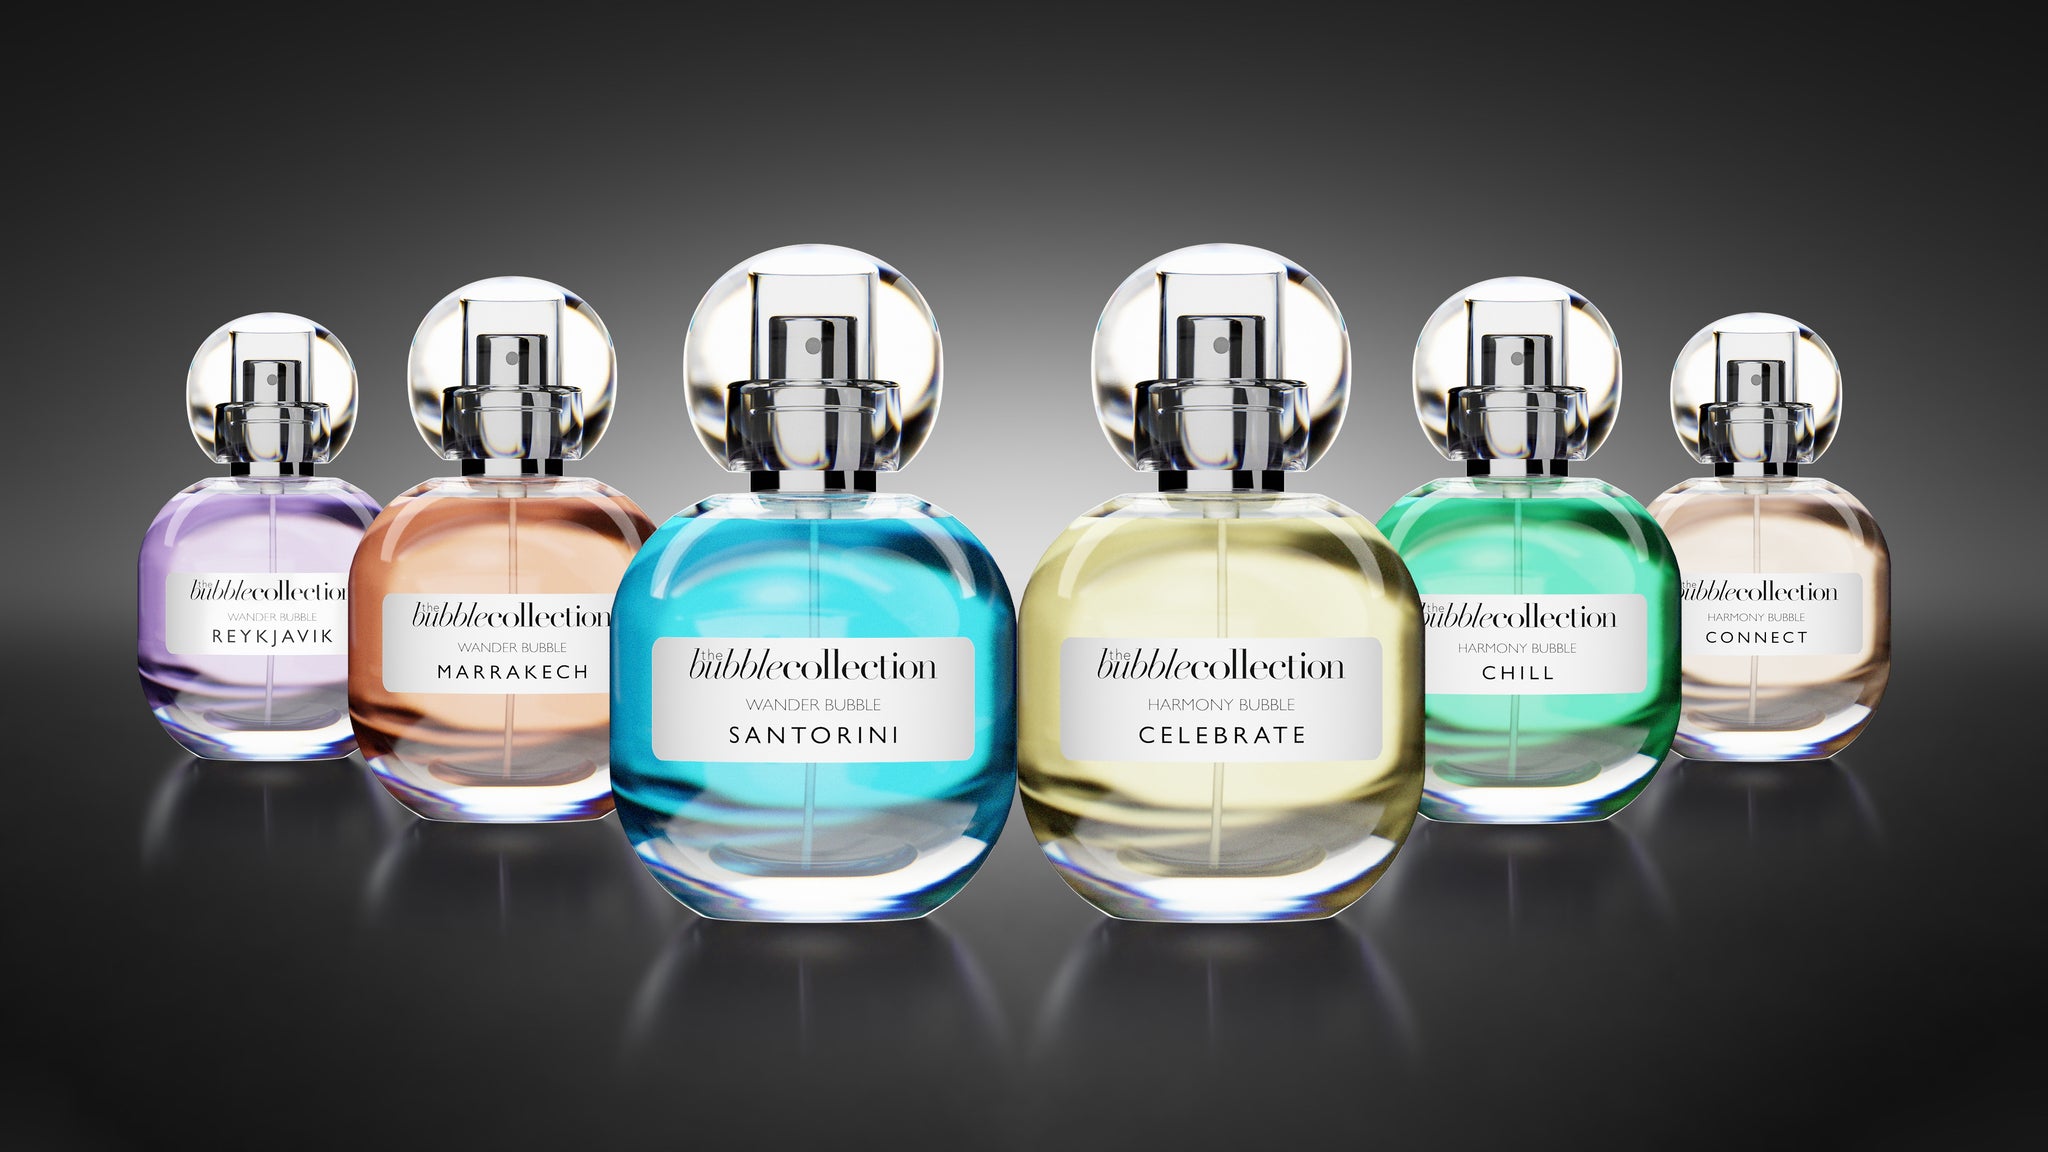 The Bubble Collection: A luxury, niche, indie brand featuring six unisex eau de toilettes. All fragrances are vegan and certified cruelty-free.